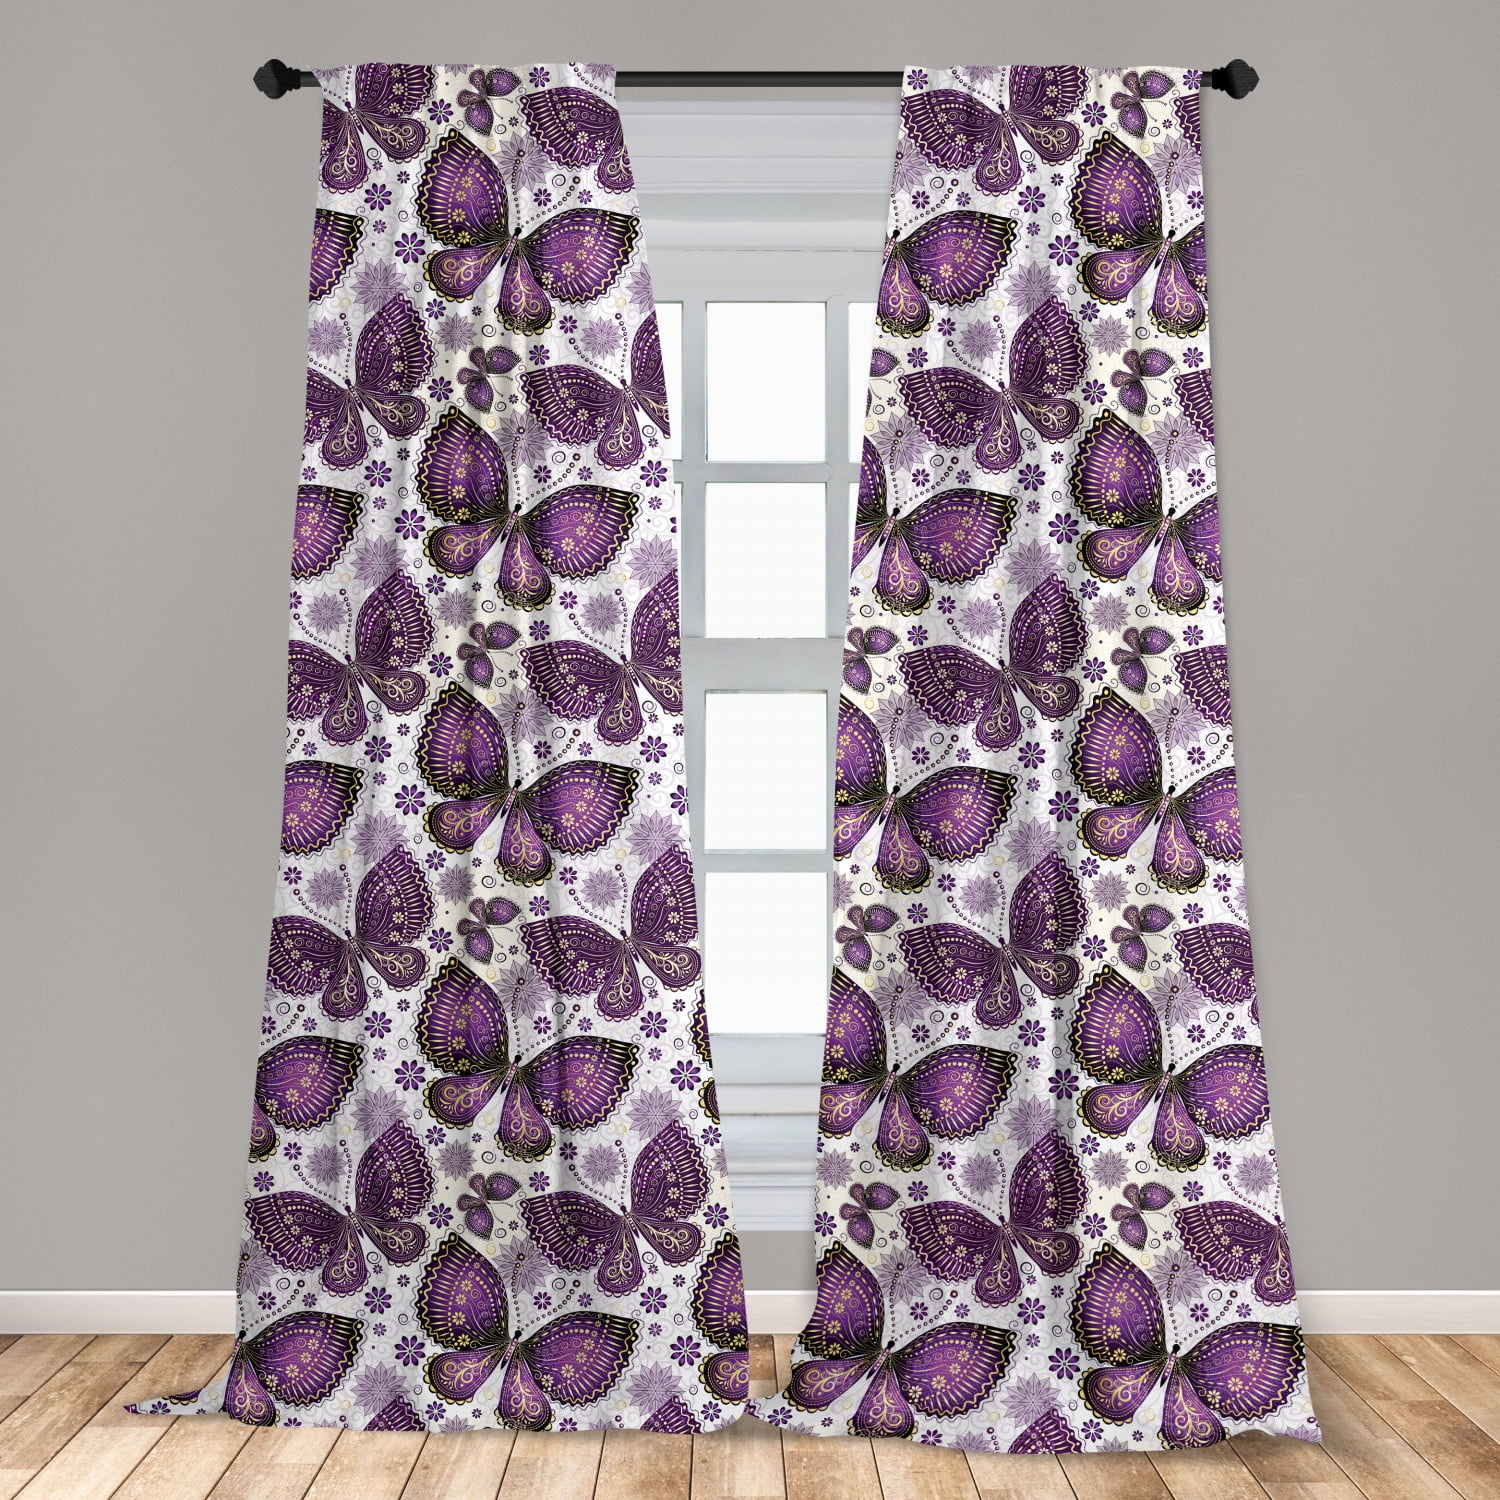 Photo Curtain "Orchid" Curtain with Motif Digital Printing to measure Curtain Printed